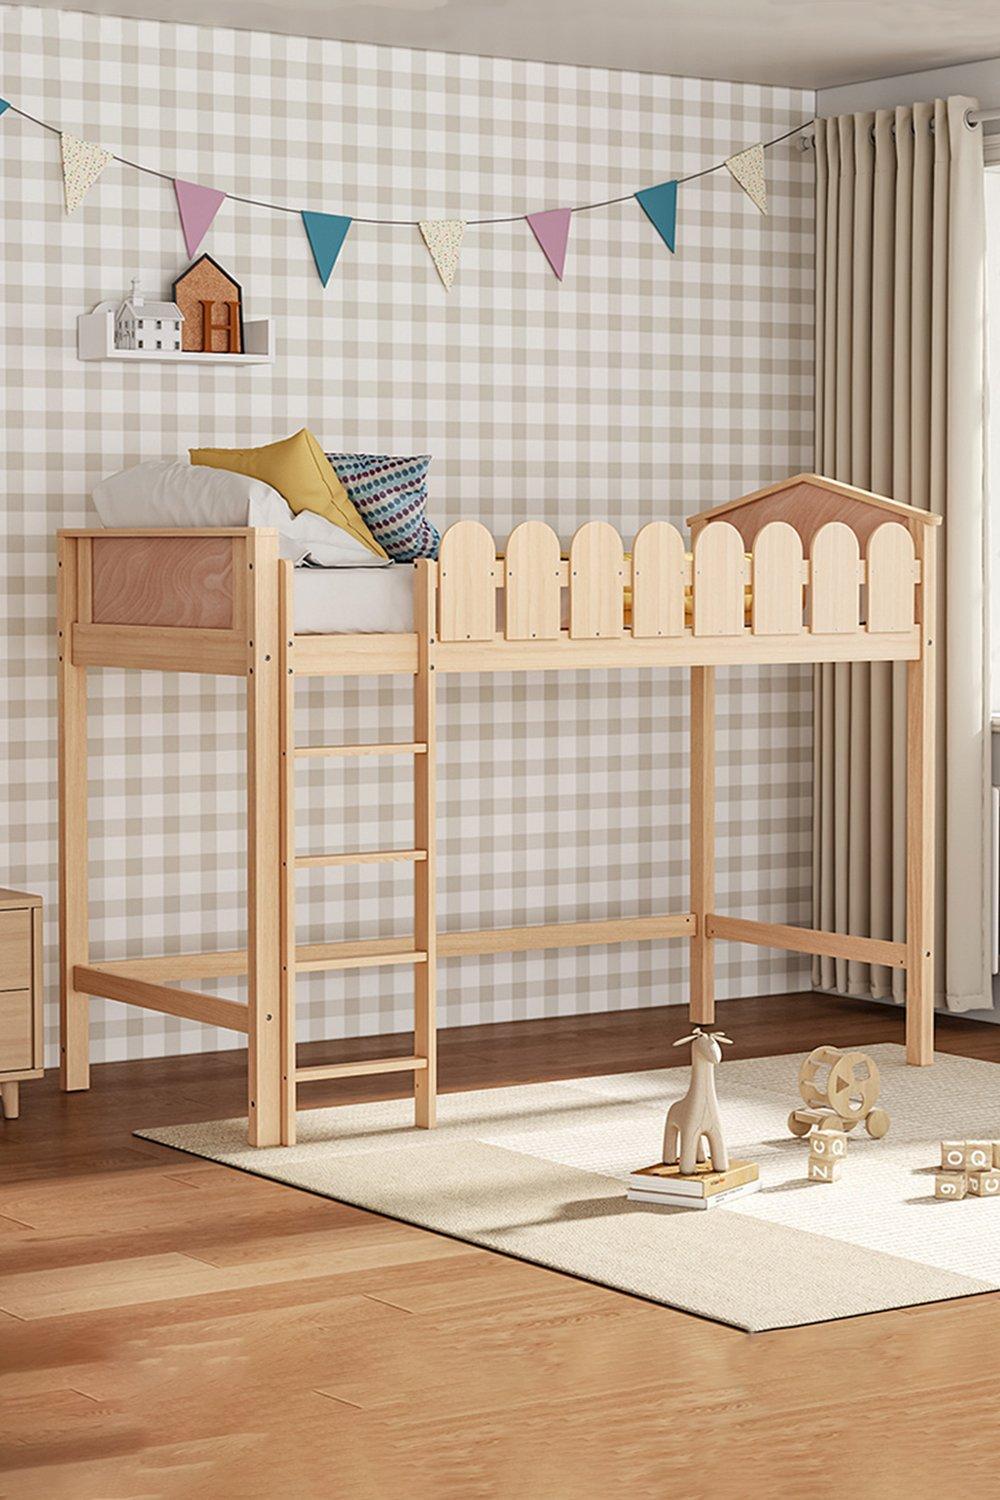 Pine Wood Loft Bed for Kids Room with Fence Rails